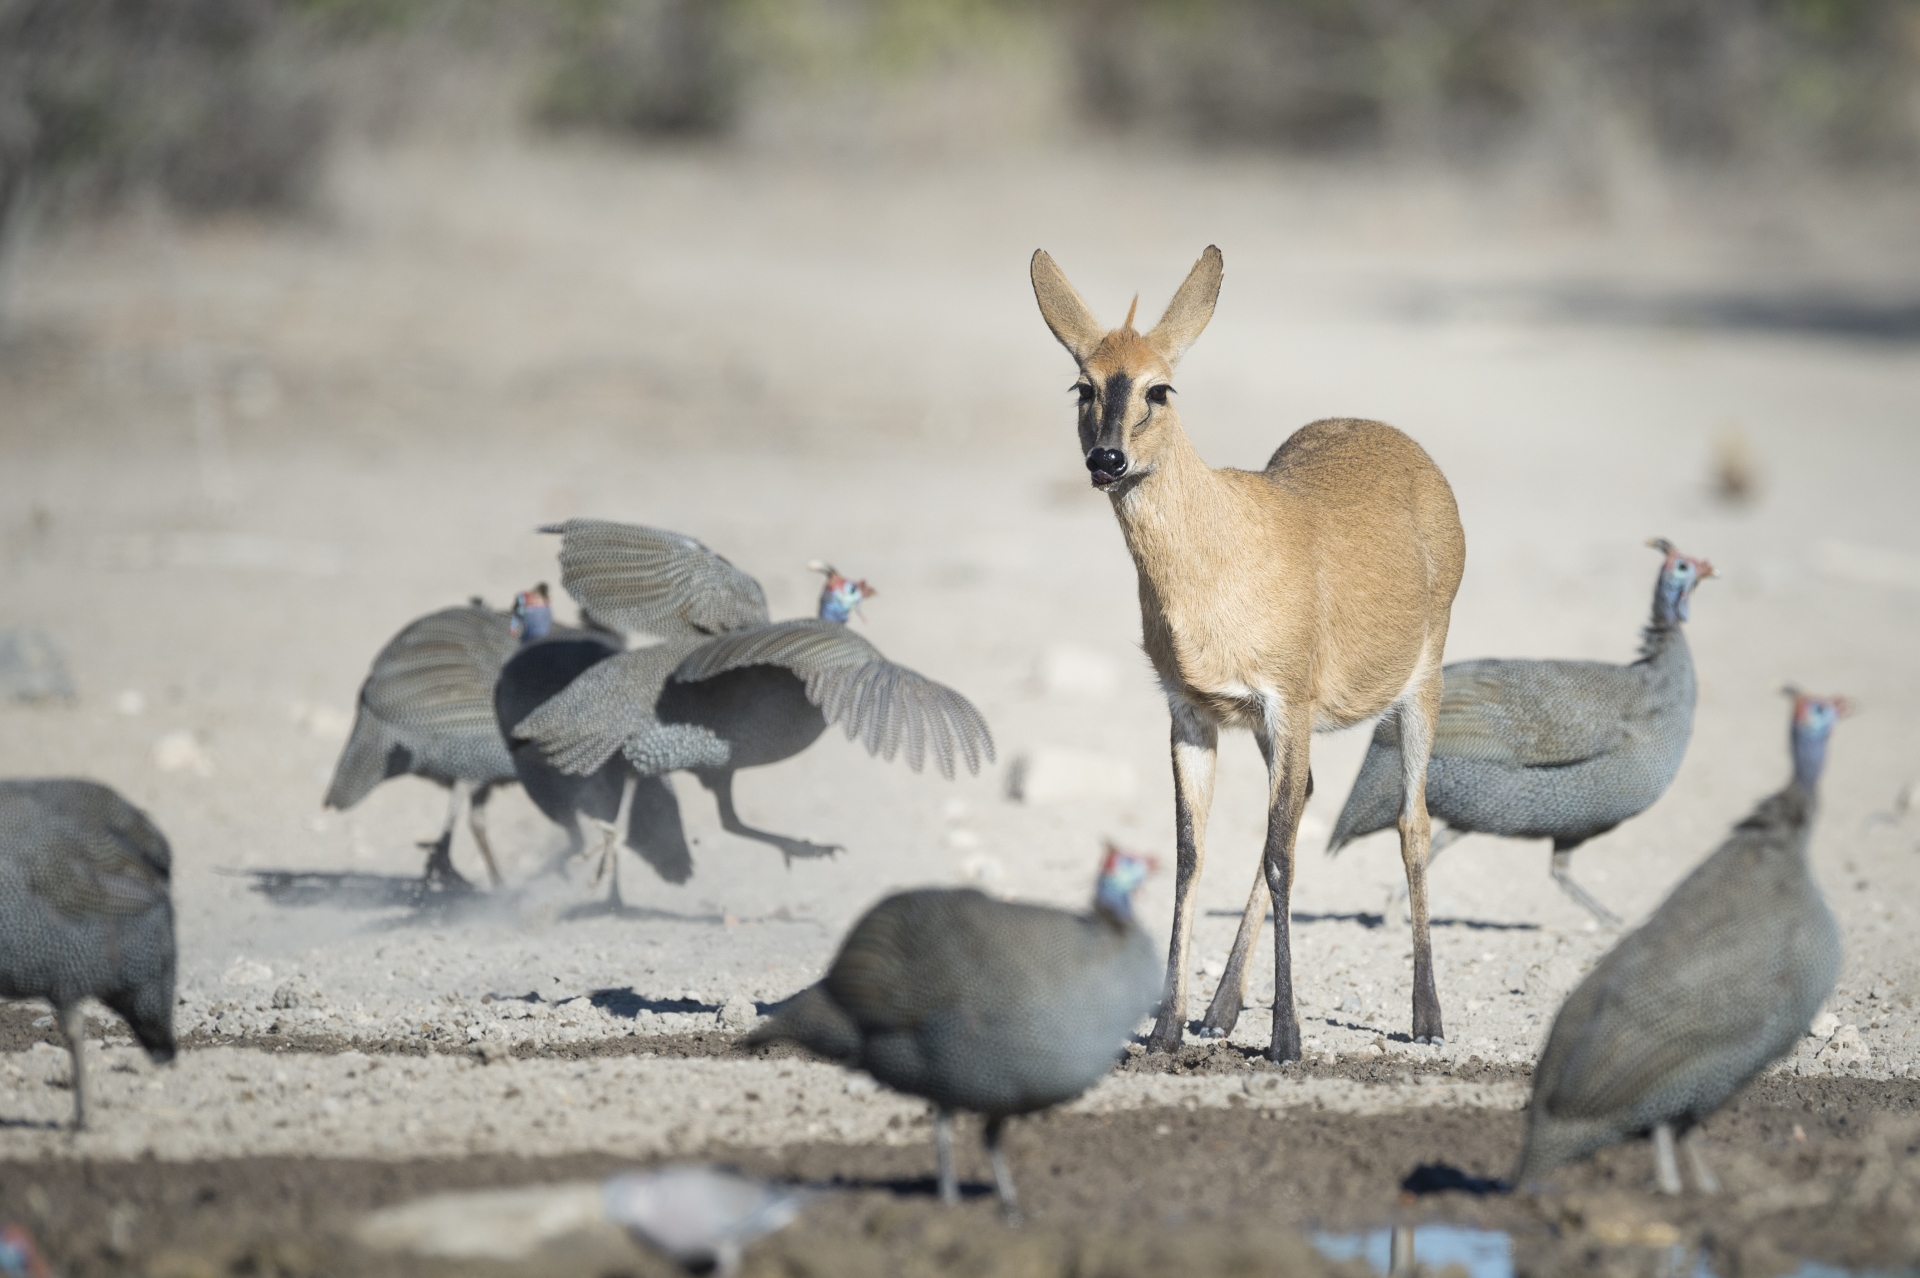 Duiker and guinea fowl by watering hole 